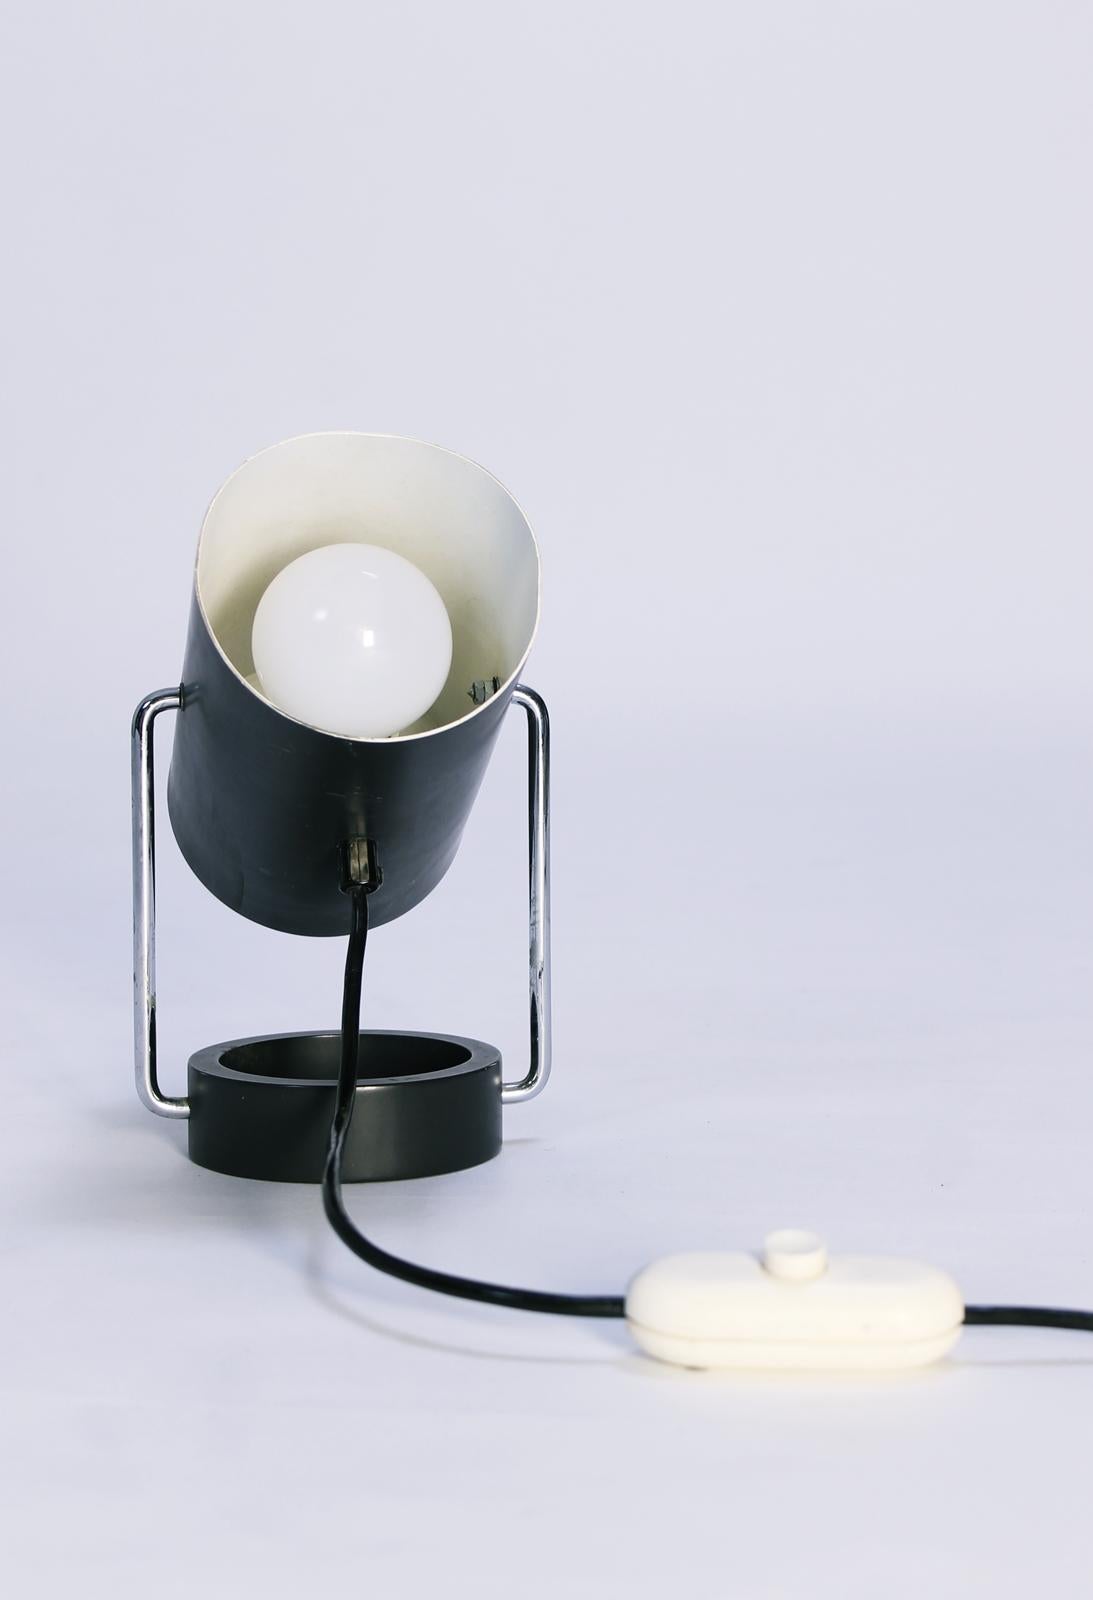 Pair of Tubus Table Lamps by Tulux in Style of Baltensweiler Swiss, 1960s For Sale 1